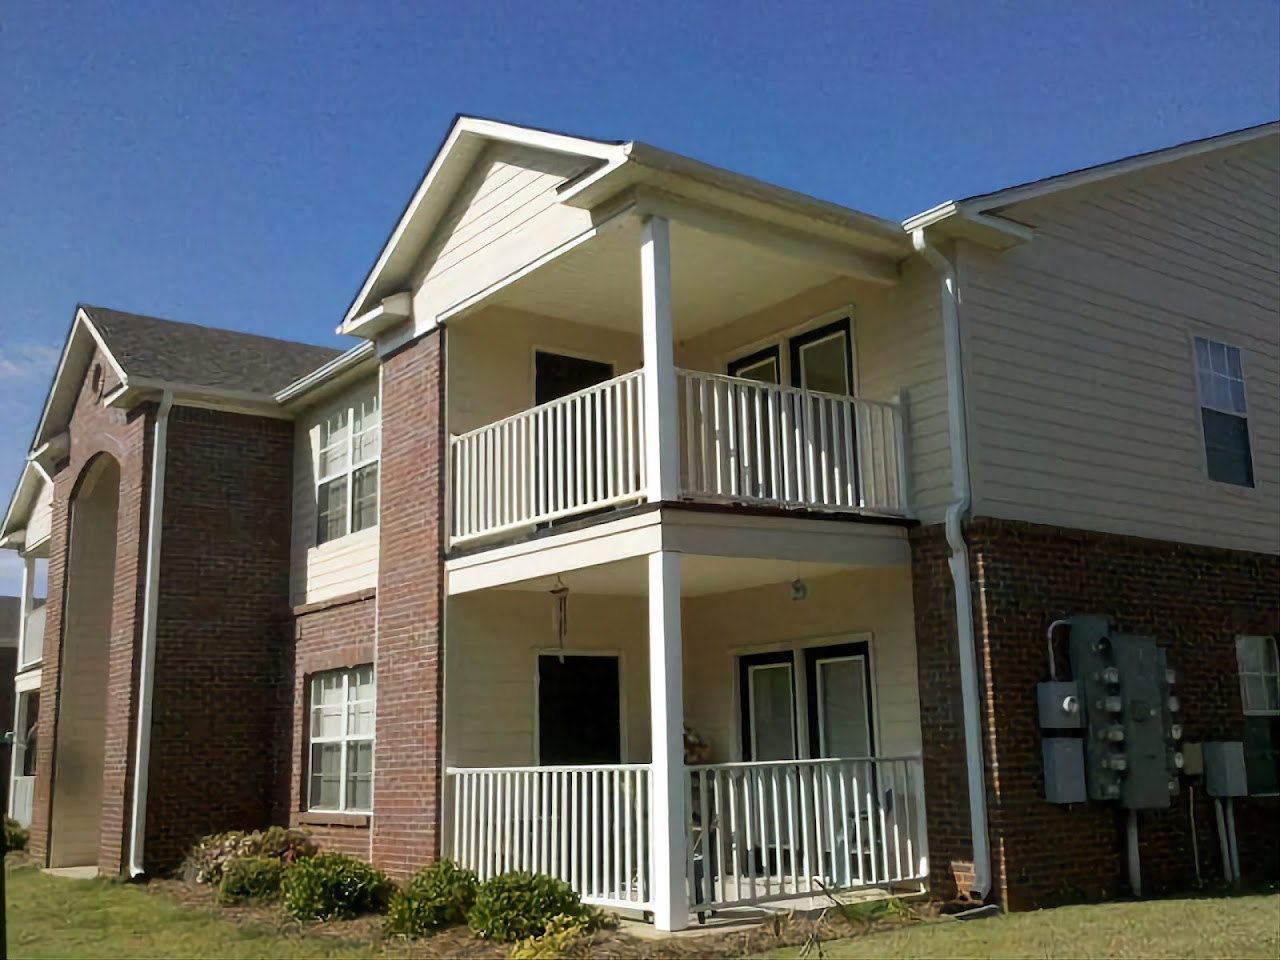 Photo of HERON COVE APTS I. Affordable housing located at 550 GLOVER AVE ENTERPRISE, AL 36330